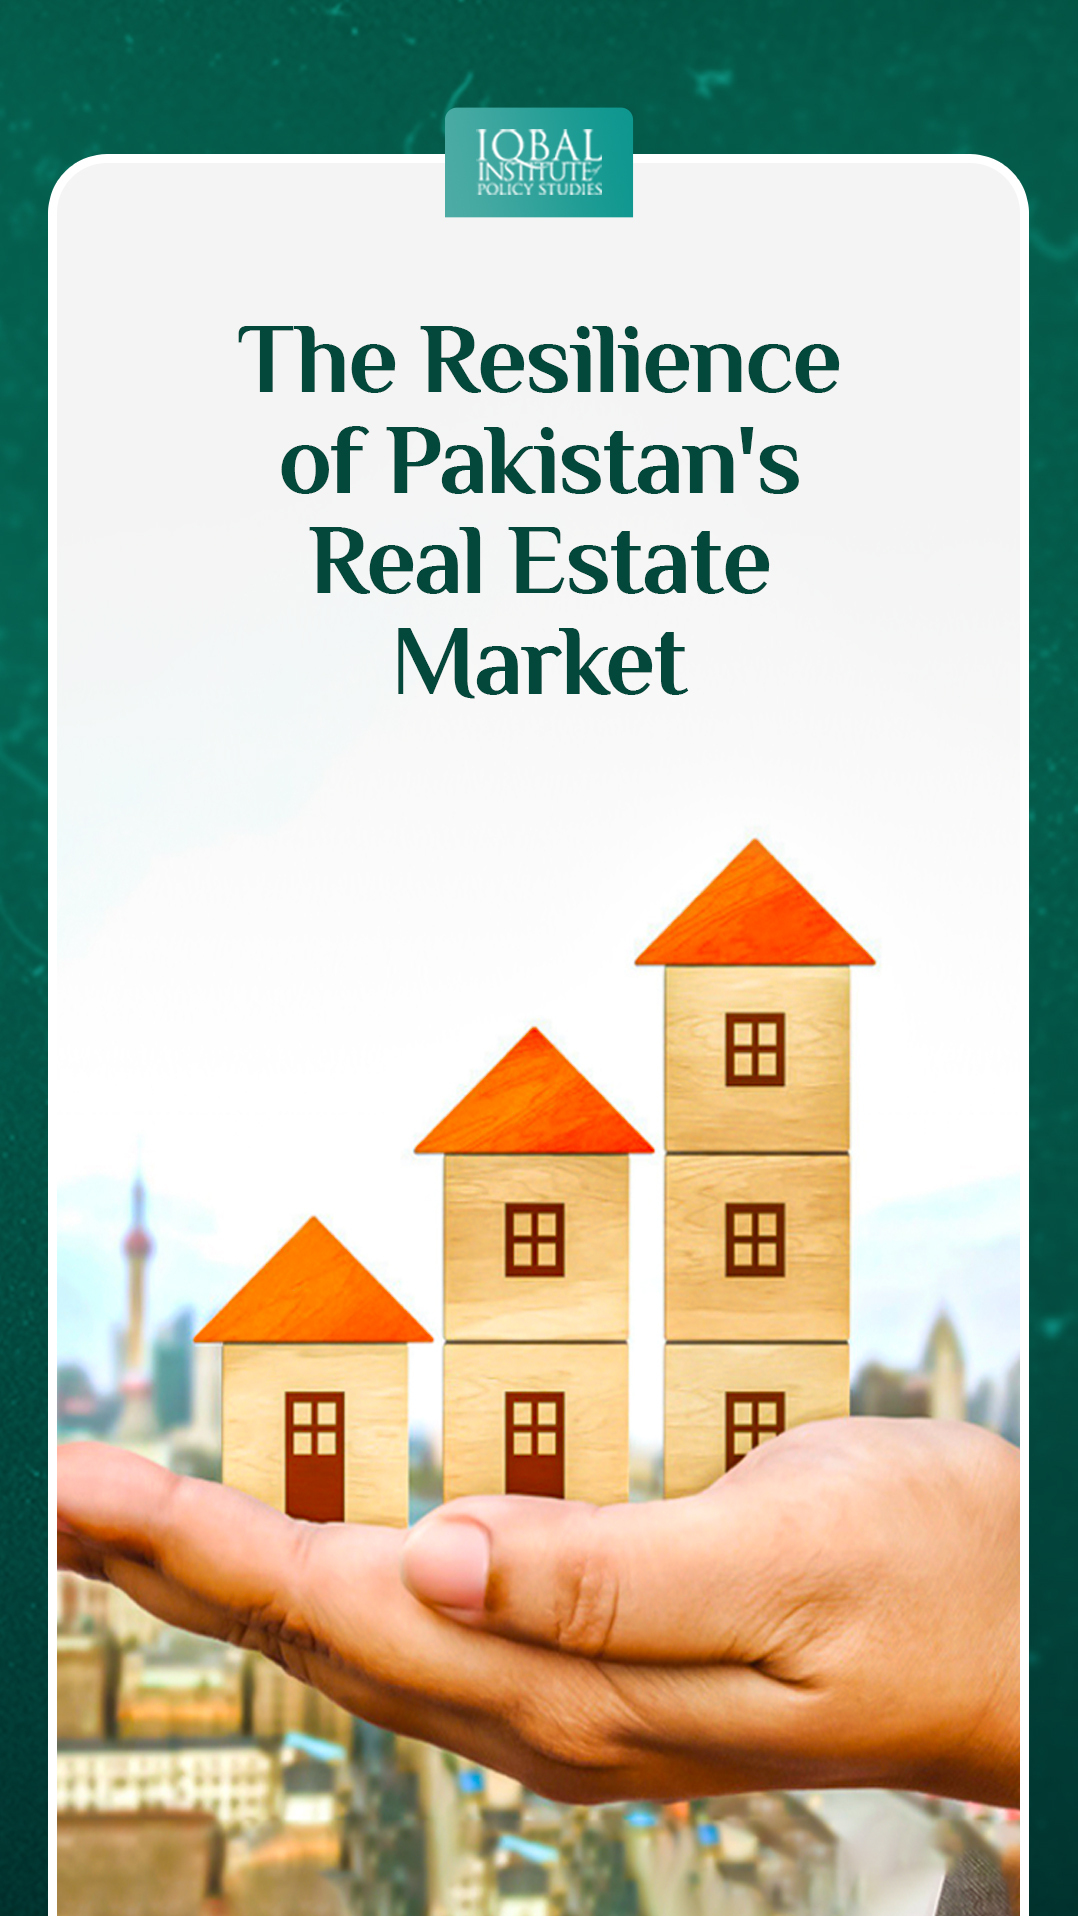 Pakistan's real estate market has demonstrated remarkable resilience over the years, driven by demographic factors,